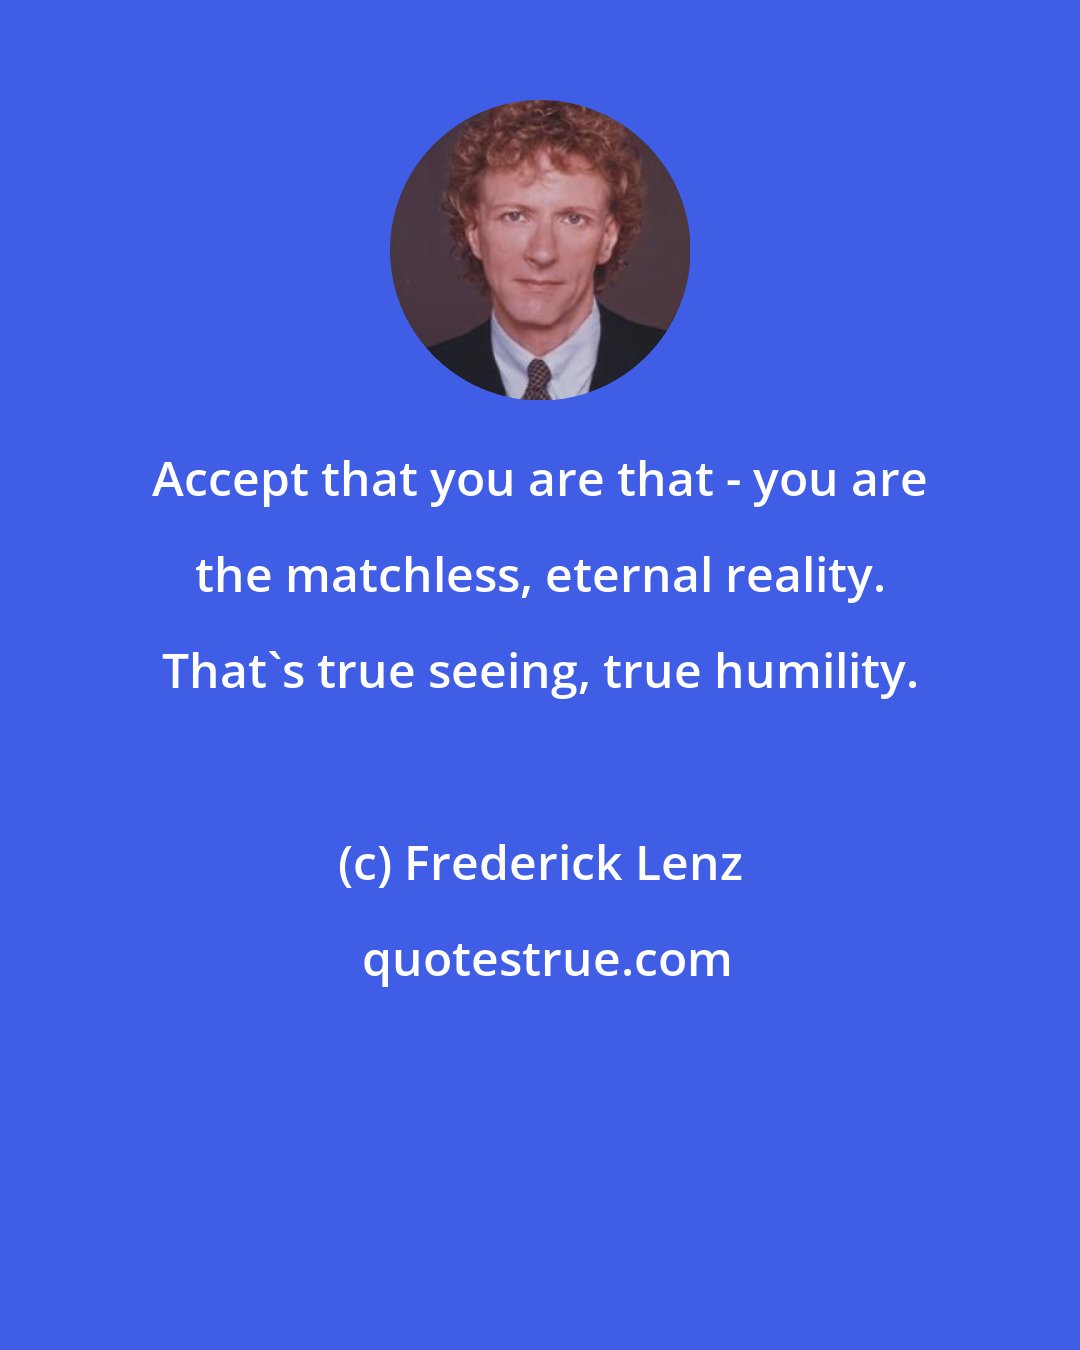 Frederick Lenz: Accept that you are that - you are the matchless, eternal reality. That's true seeing, true humility.